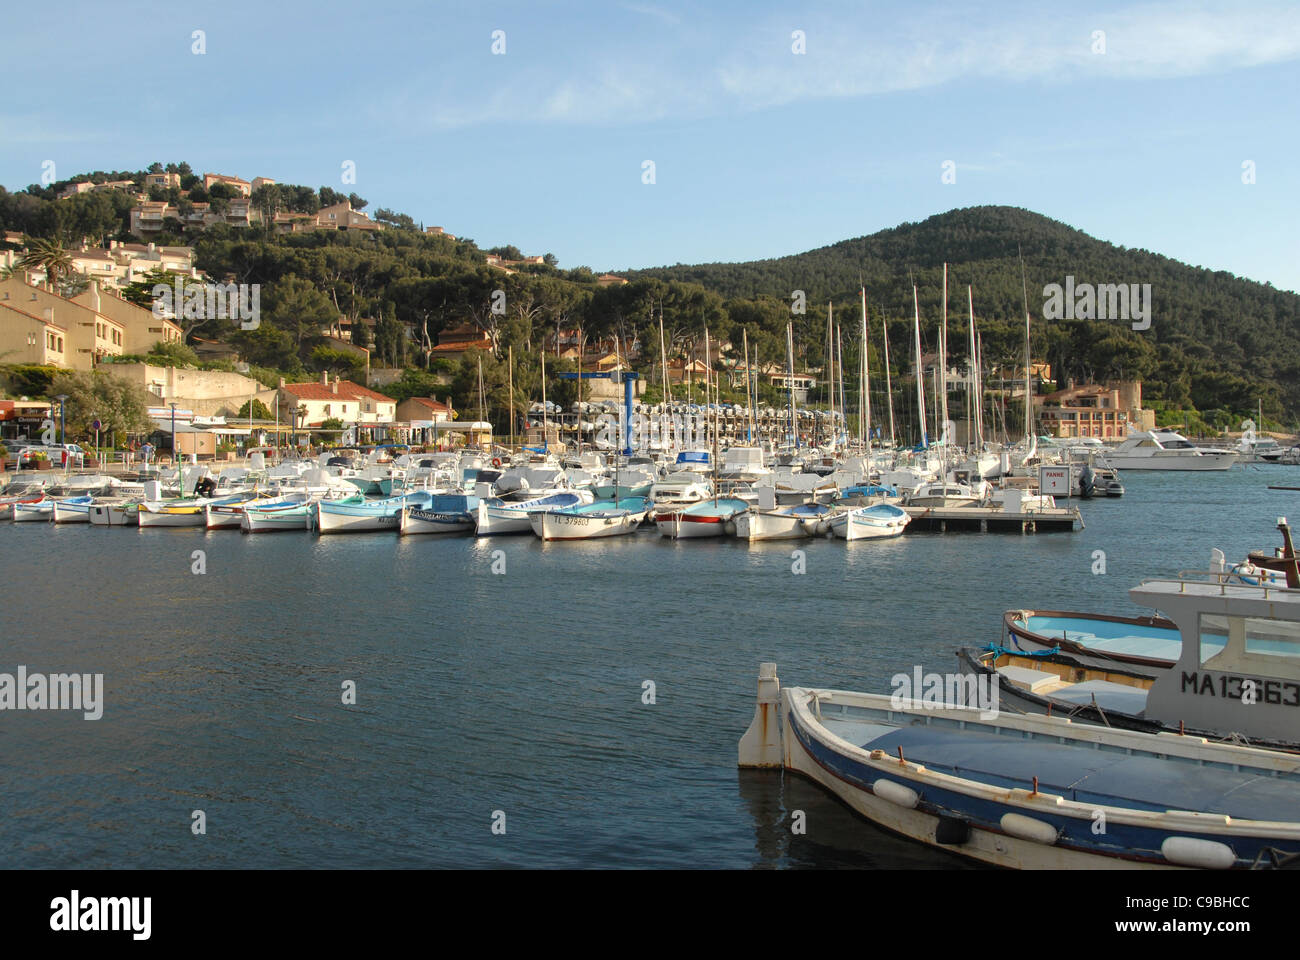 Port of La Madrague near St-Cyr-sur-Mer, Var, Provence, France with traditional fishing boats and yachts Stock Photo